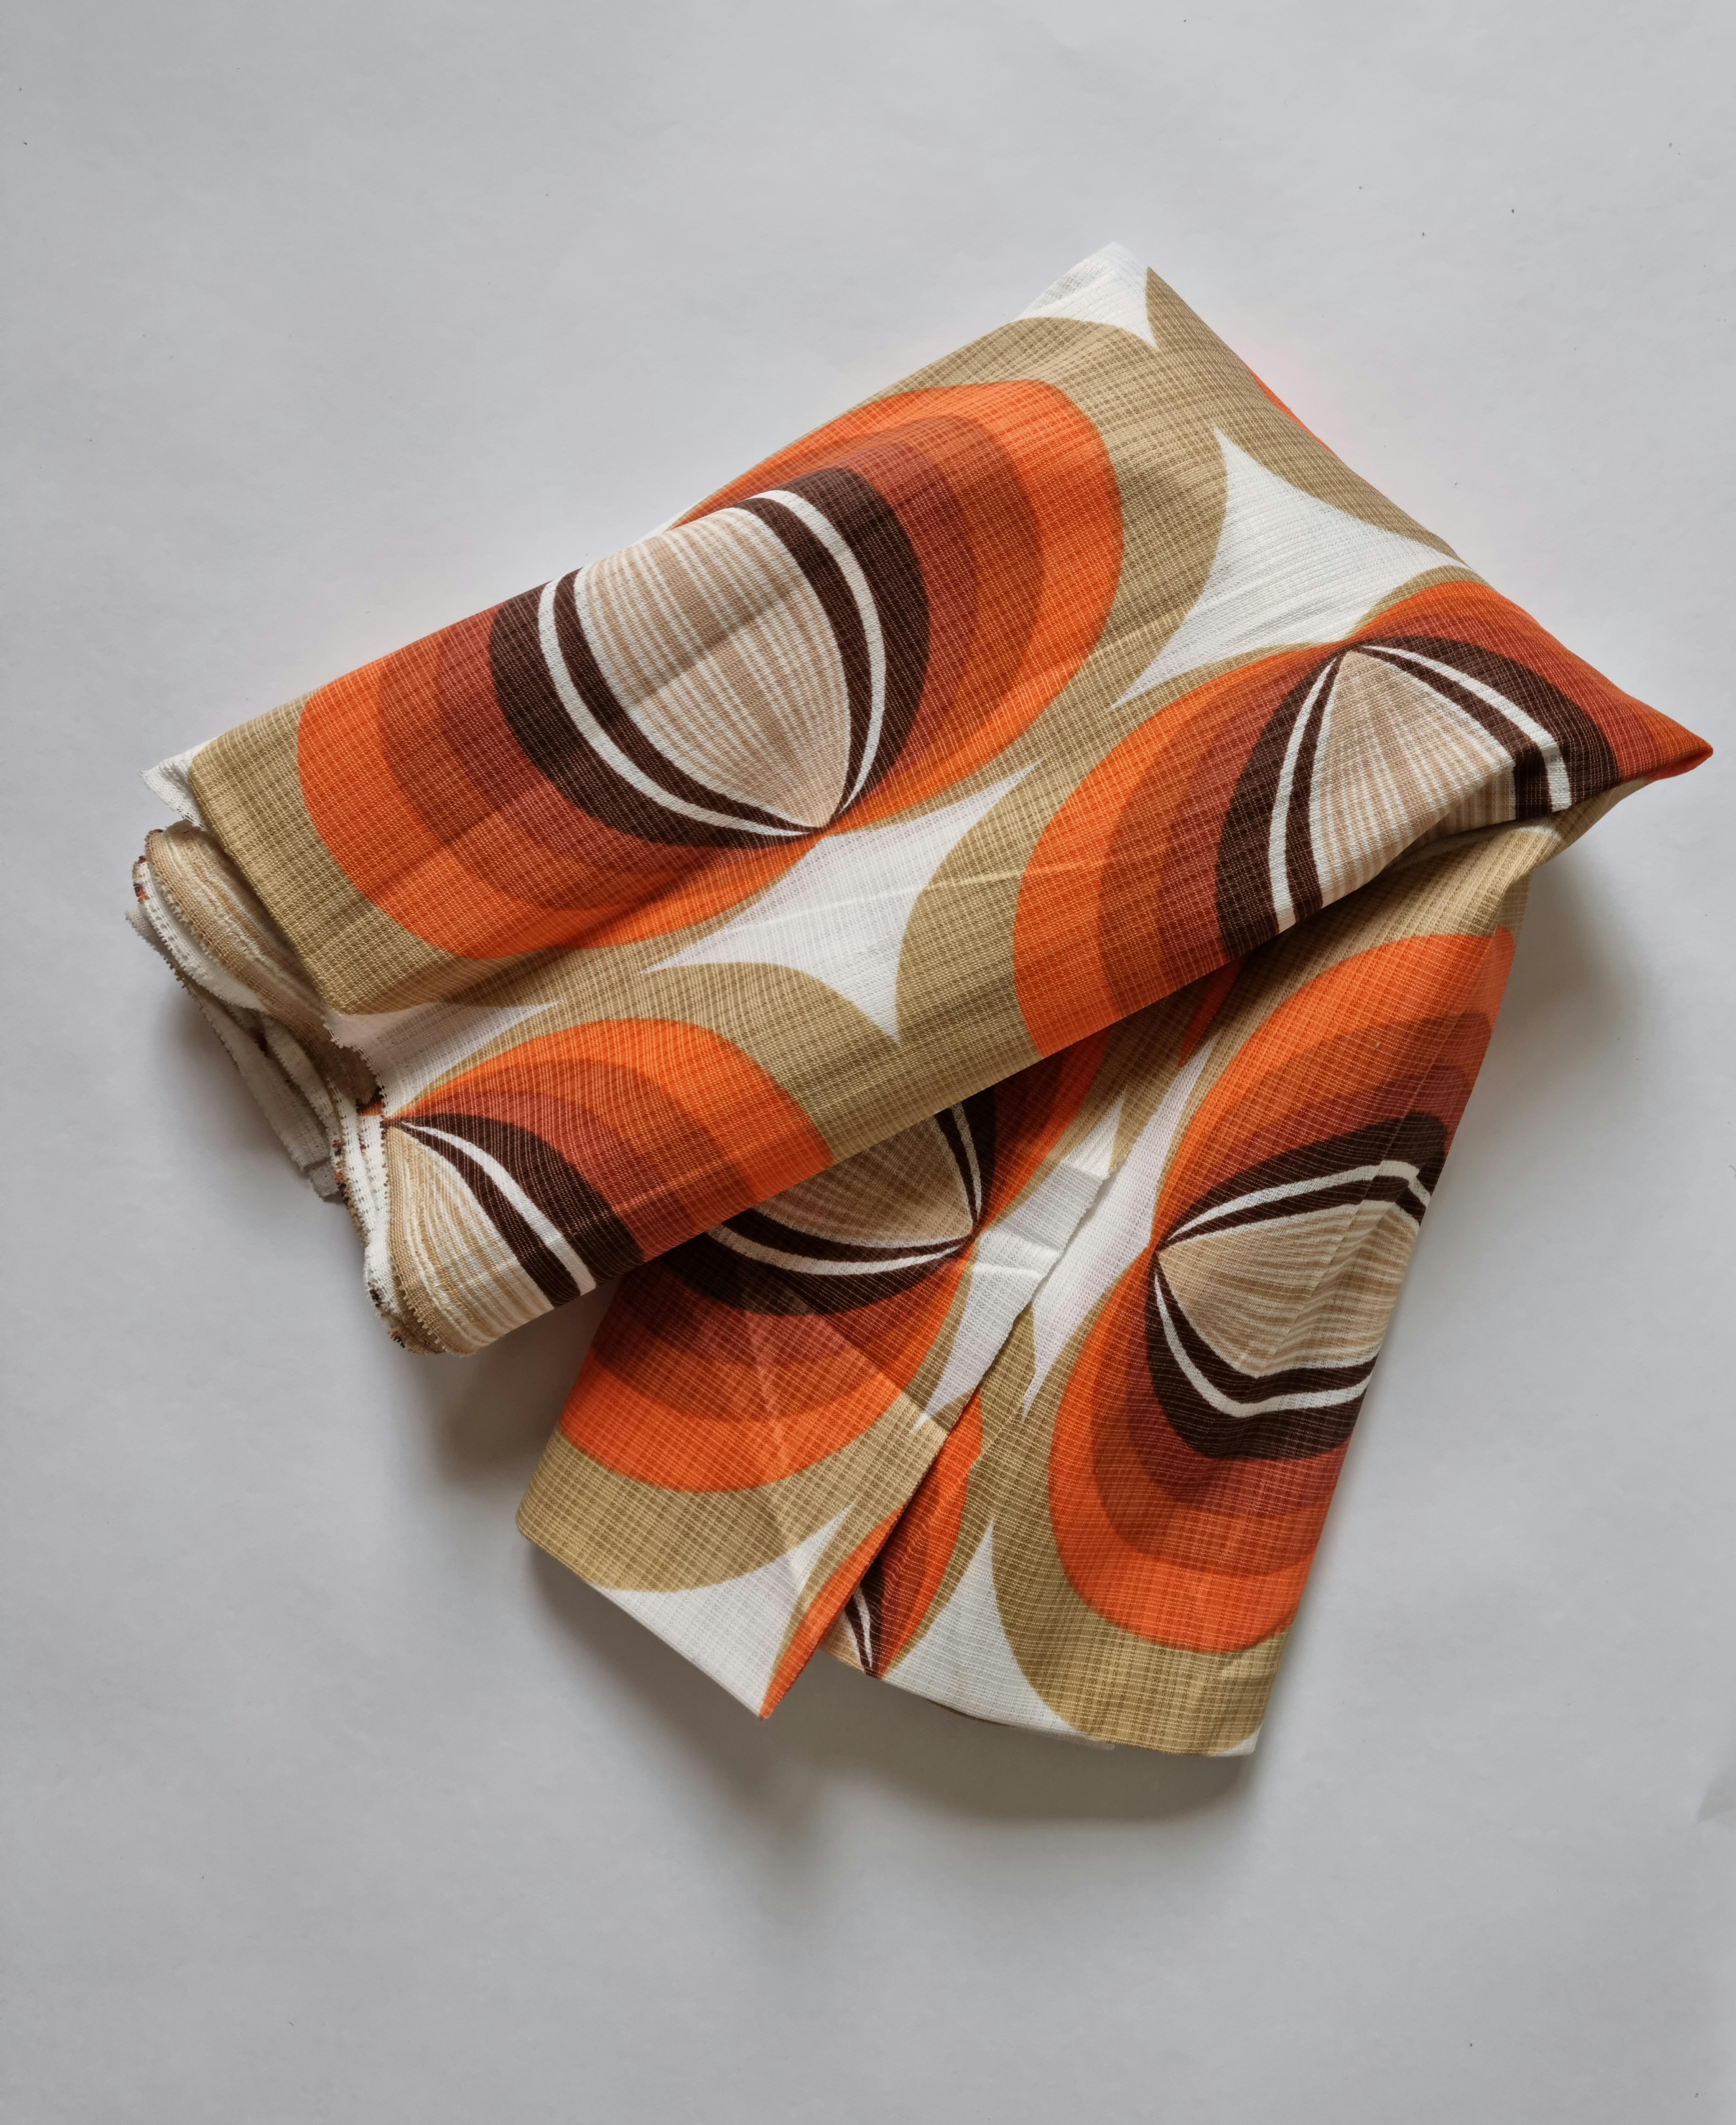 Midcentury Large Cloth, Fabric or Textile in Style of Panton Verner, 1960s In Excellent Condition For Sale In Praha, CZ